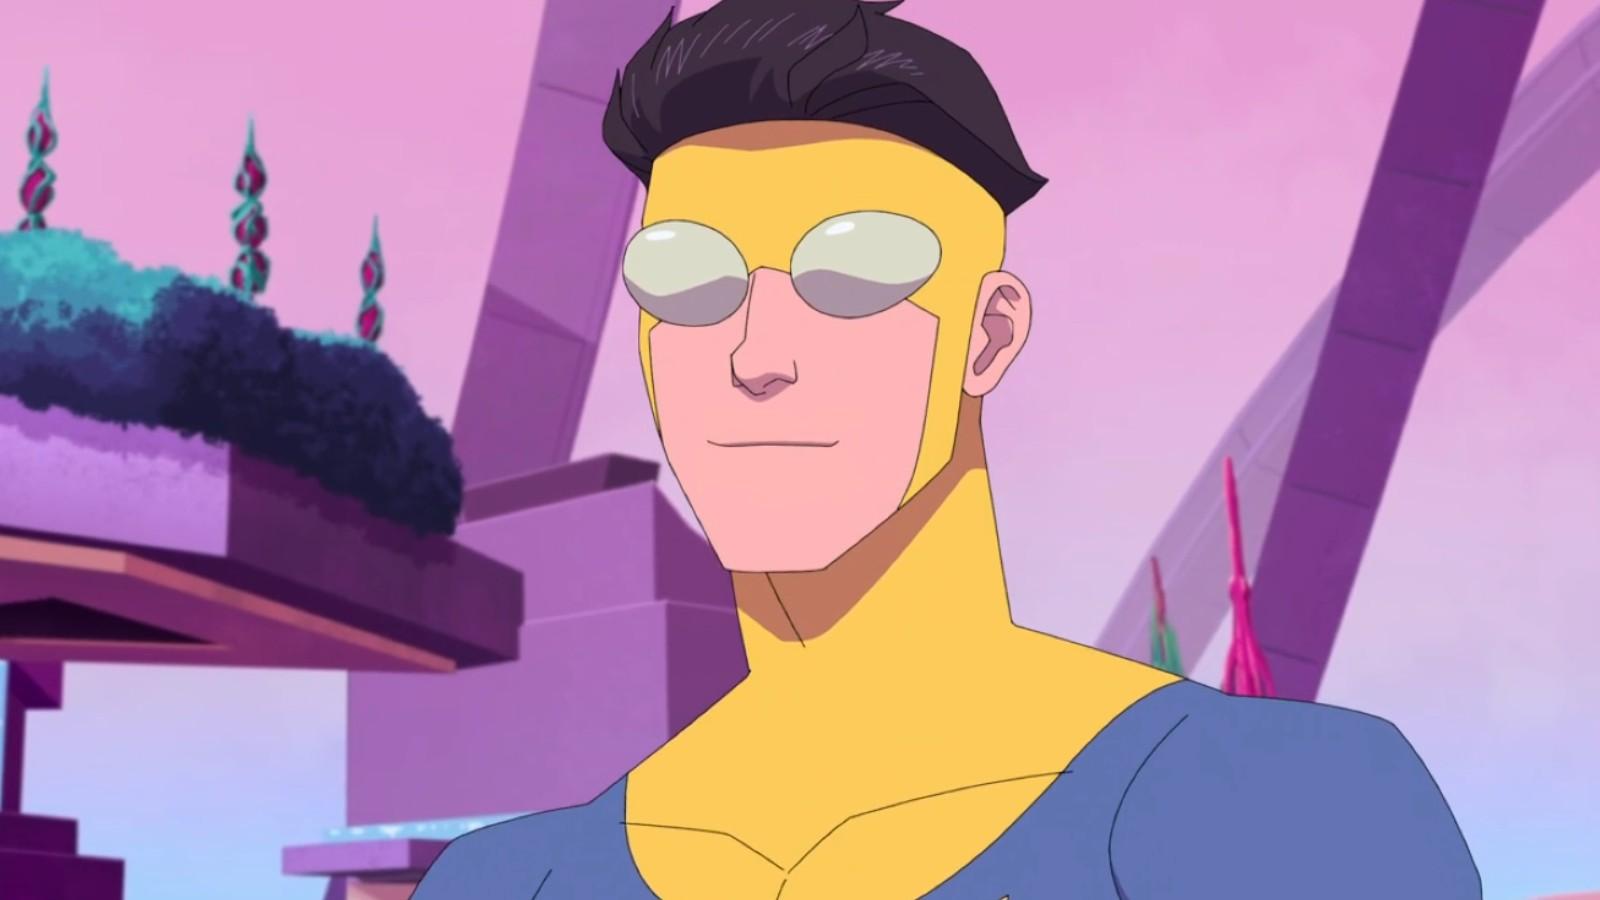 Invincible season 2 episode 5 release date: When is part 2 on